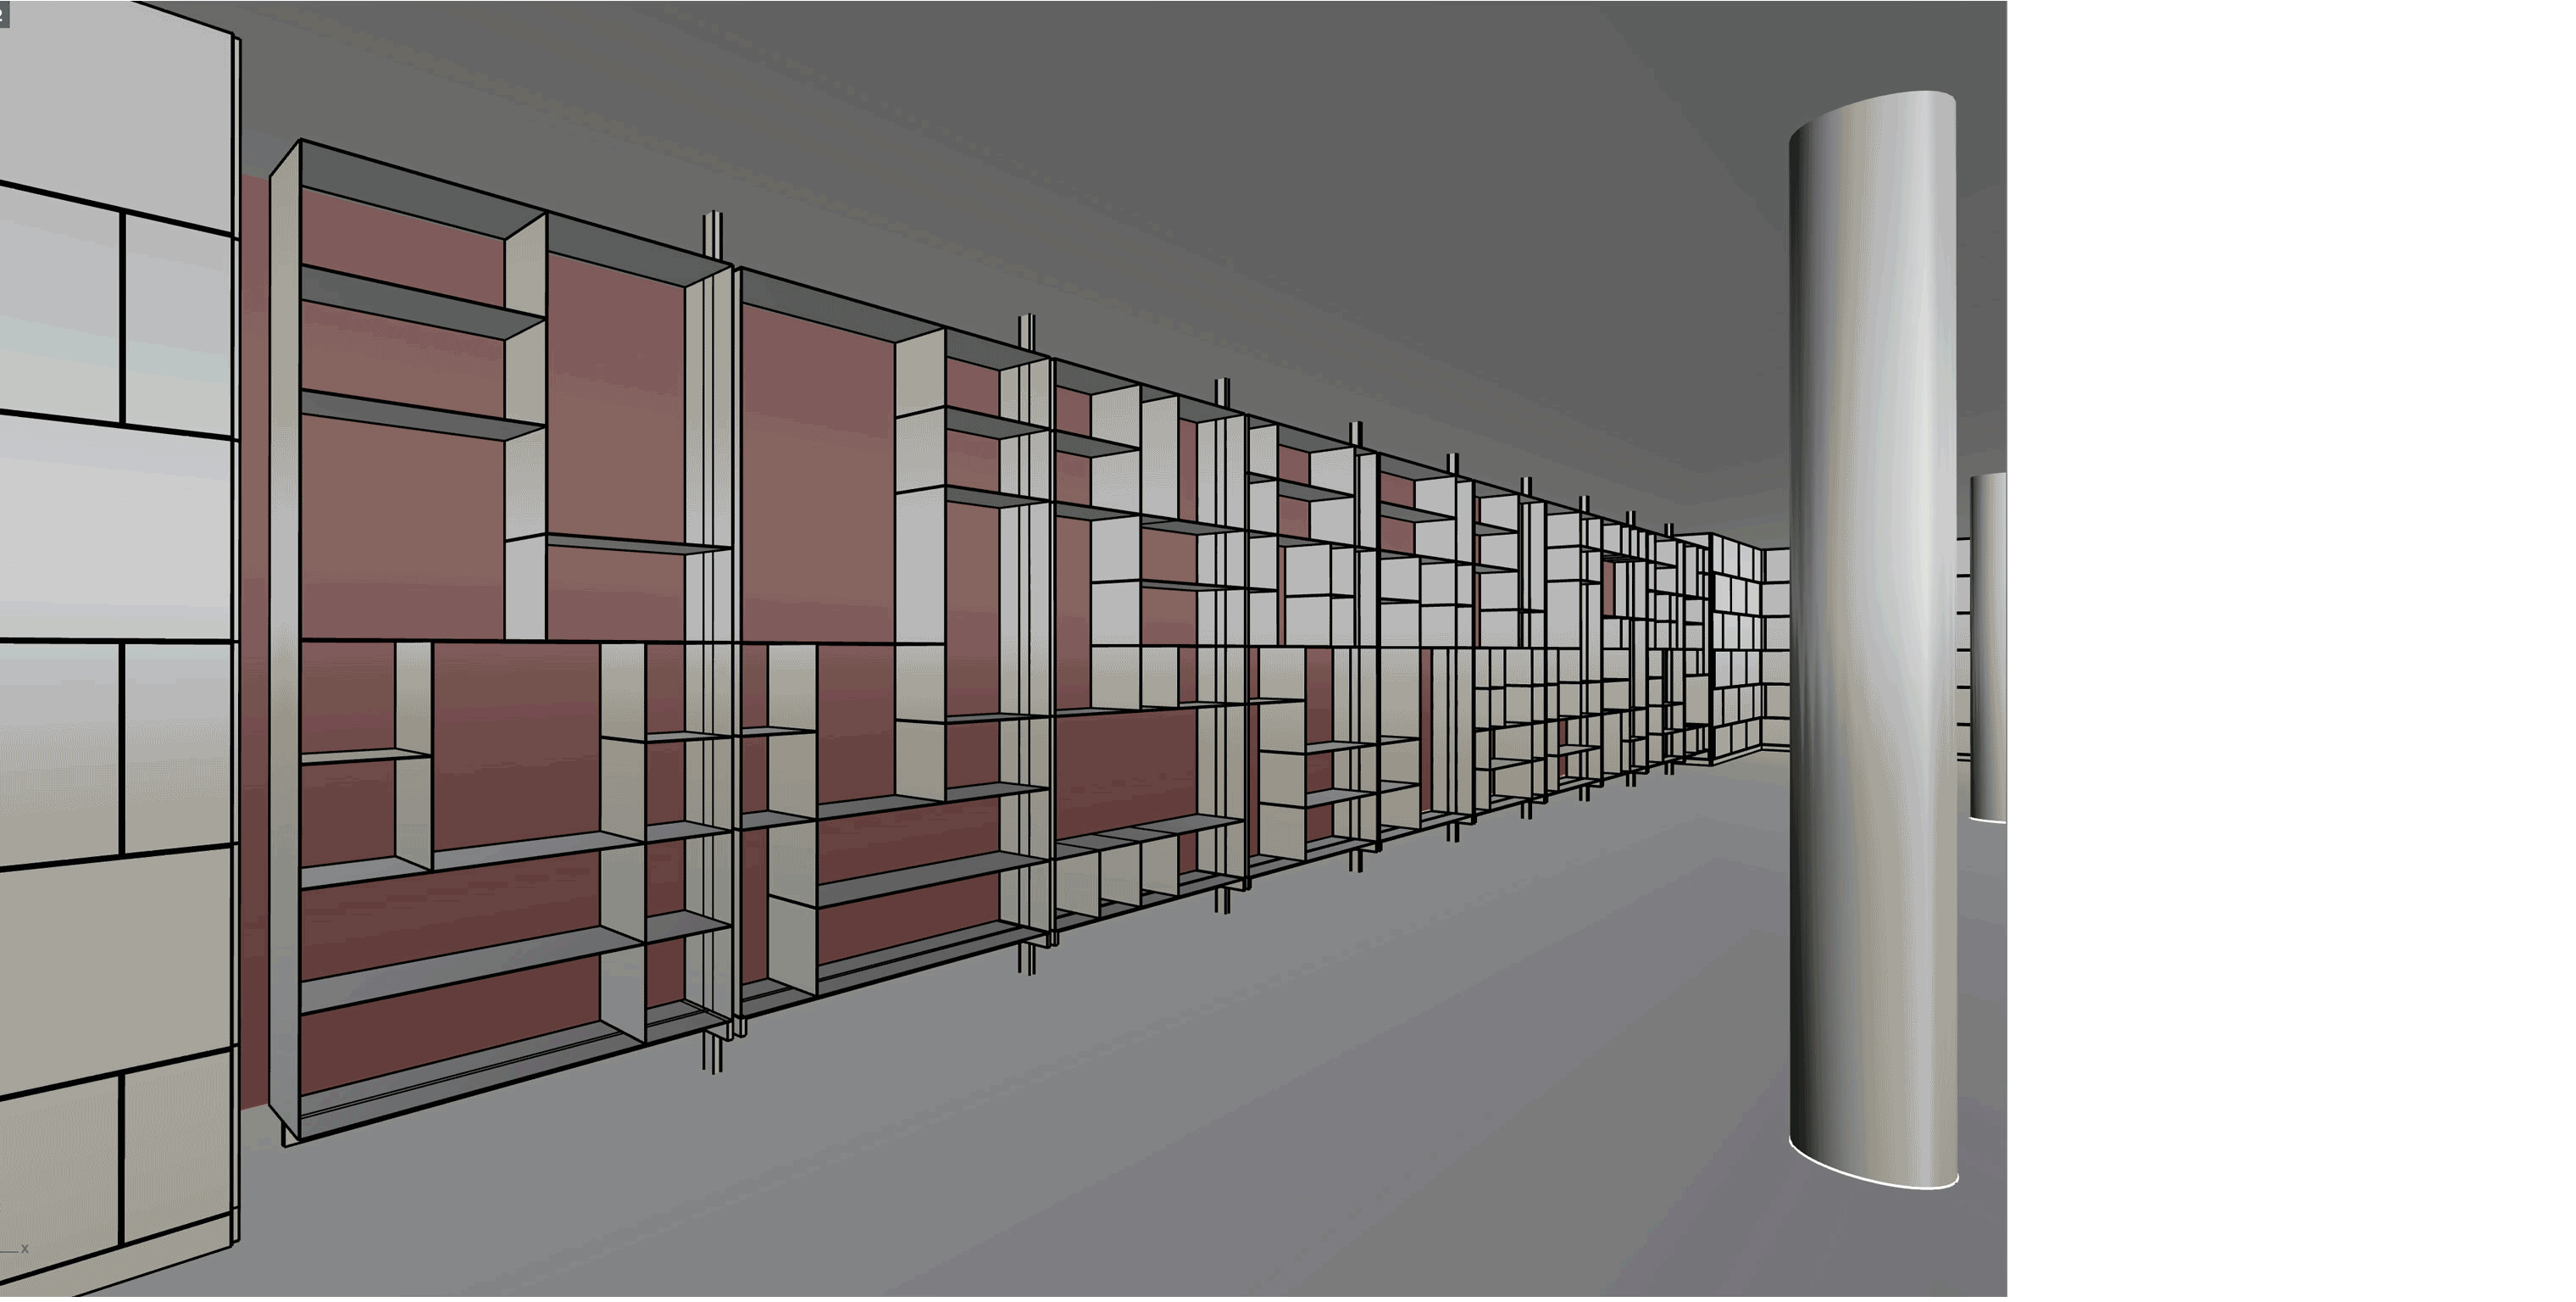 Process of rendering the bookcase, from 3D model, texture, shadow and application of person figures.